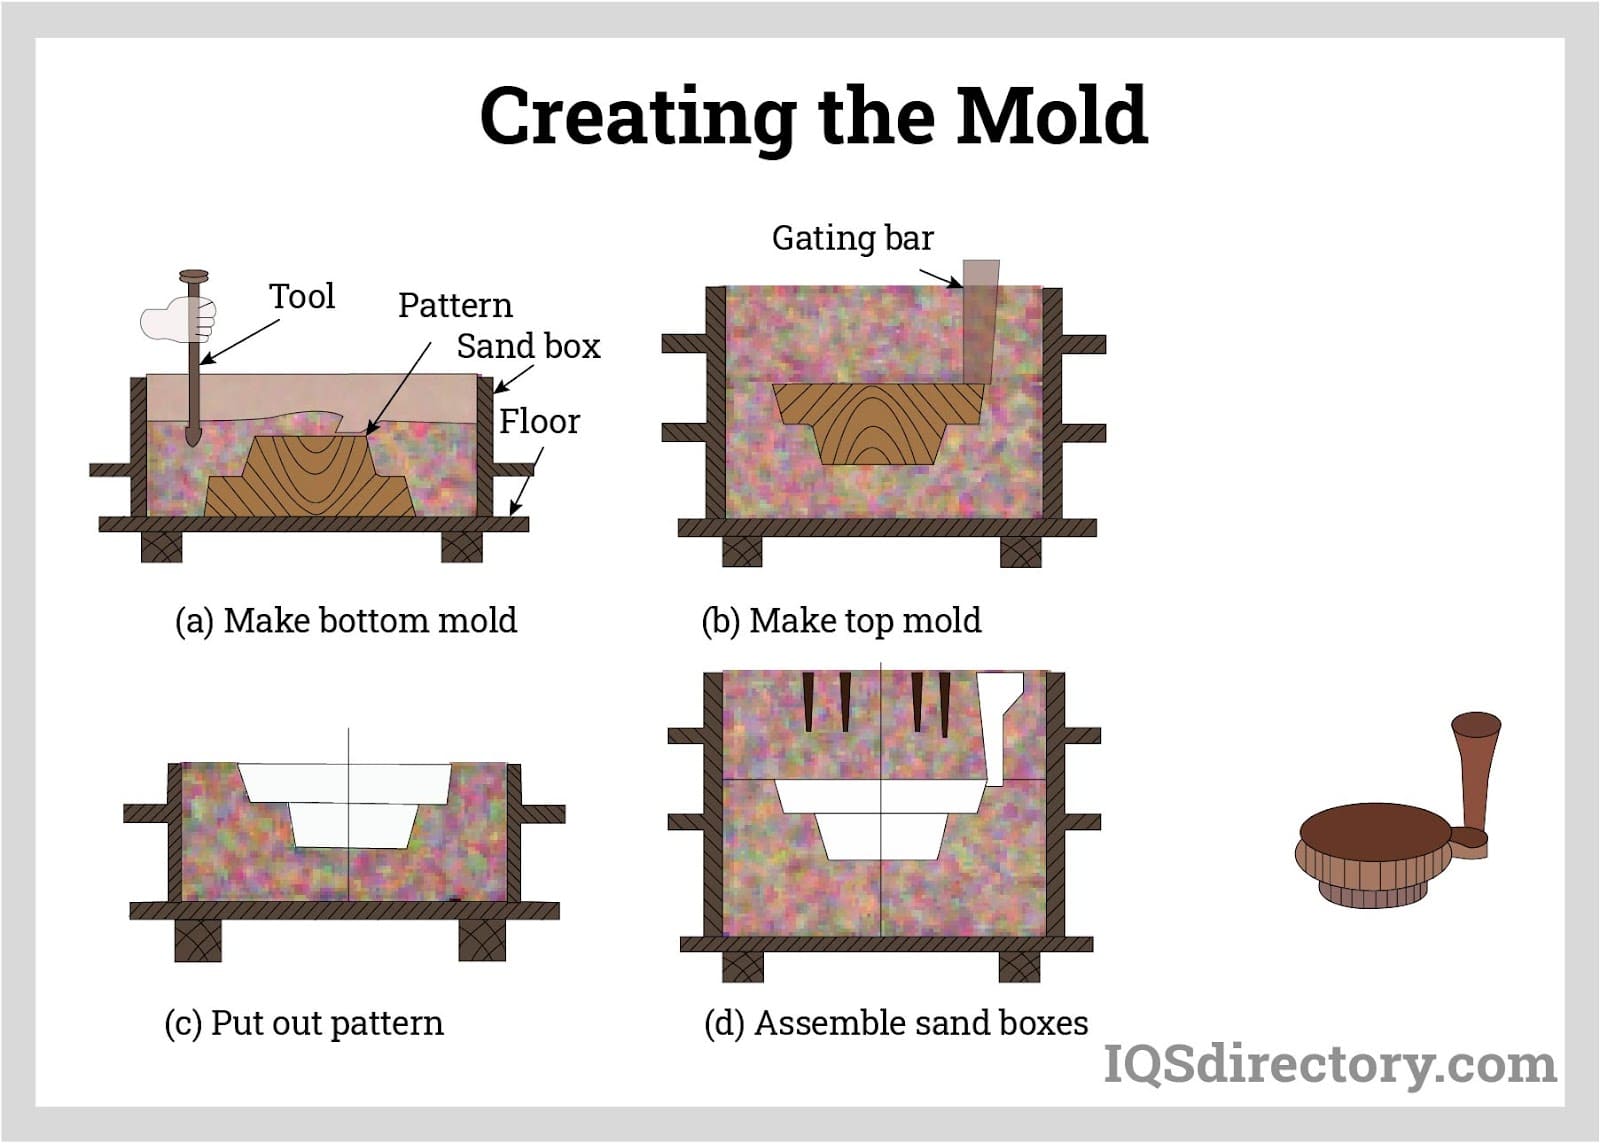 Creating the Mold